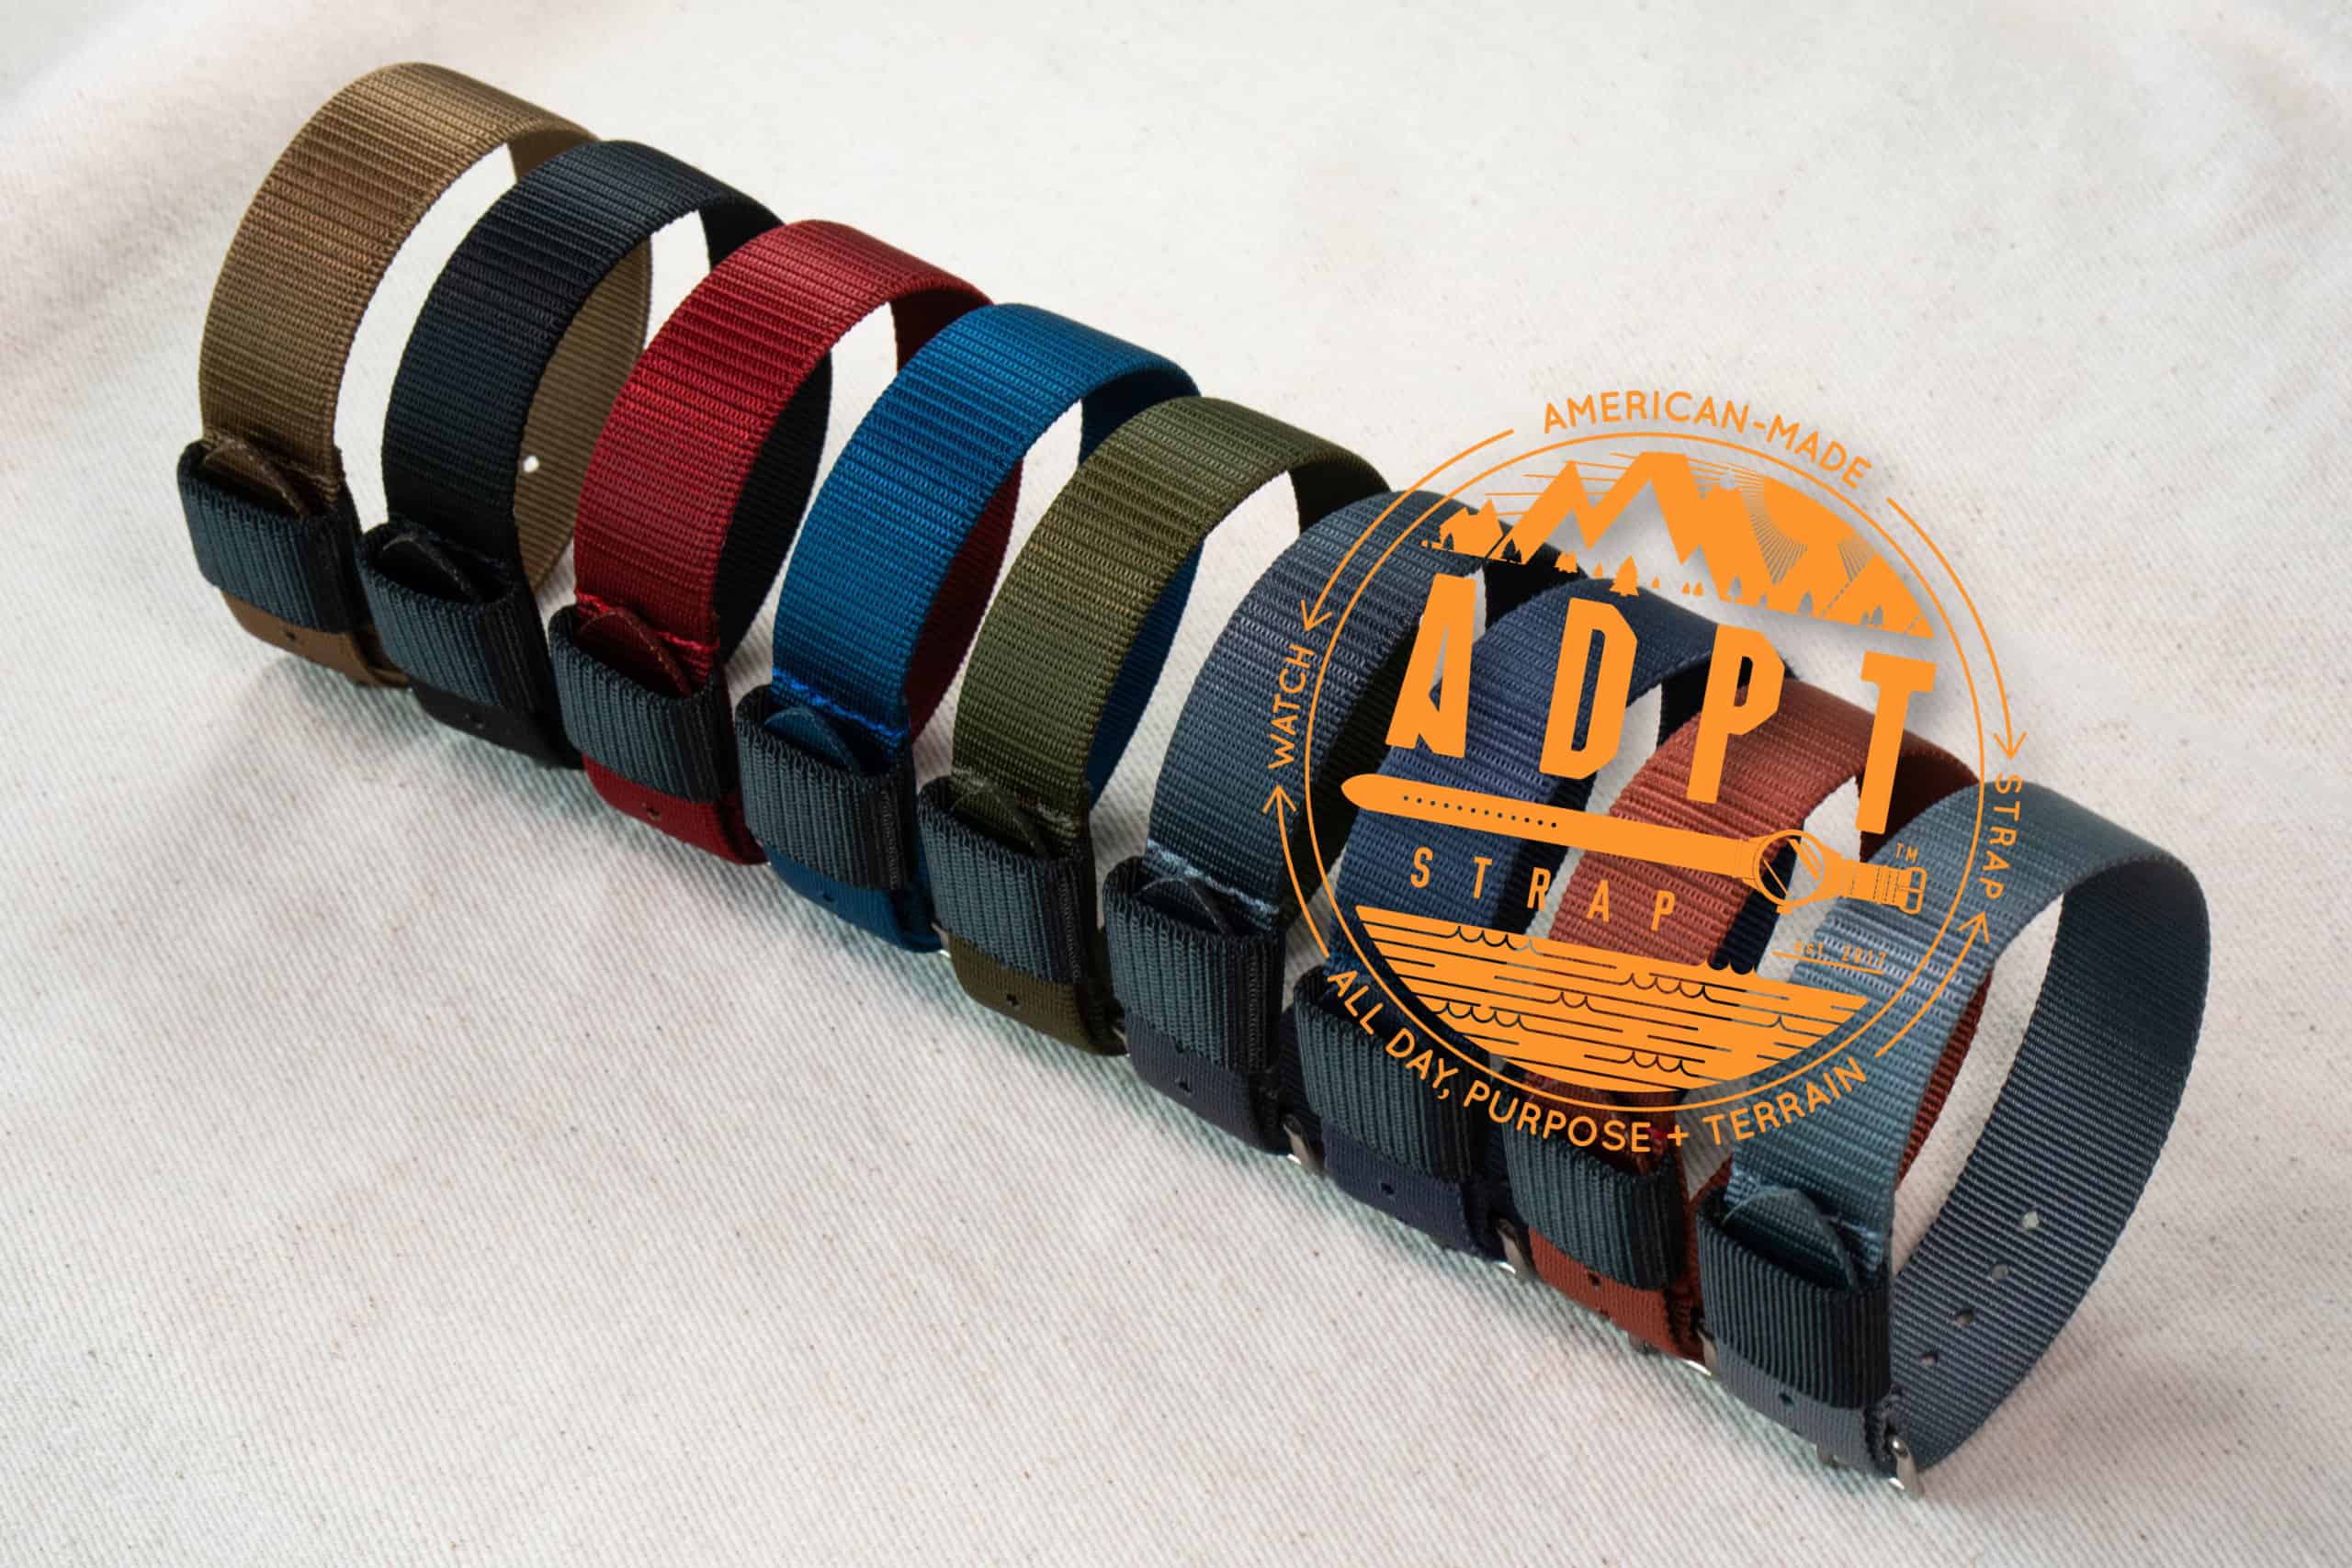 Introducing the new ADPT US-Made Single Pass Straps – Available Only at the Windup Watch Shop